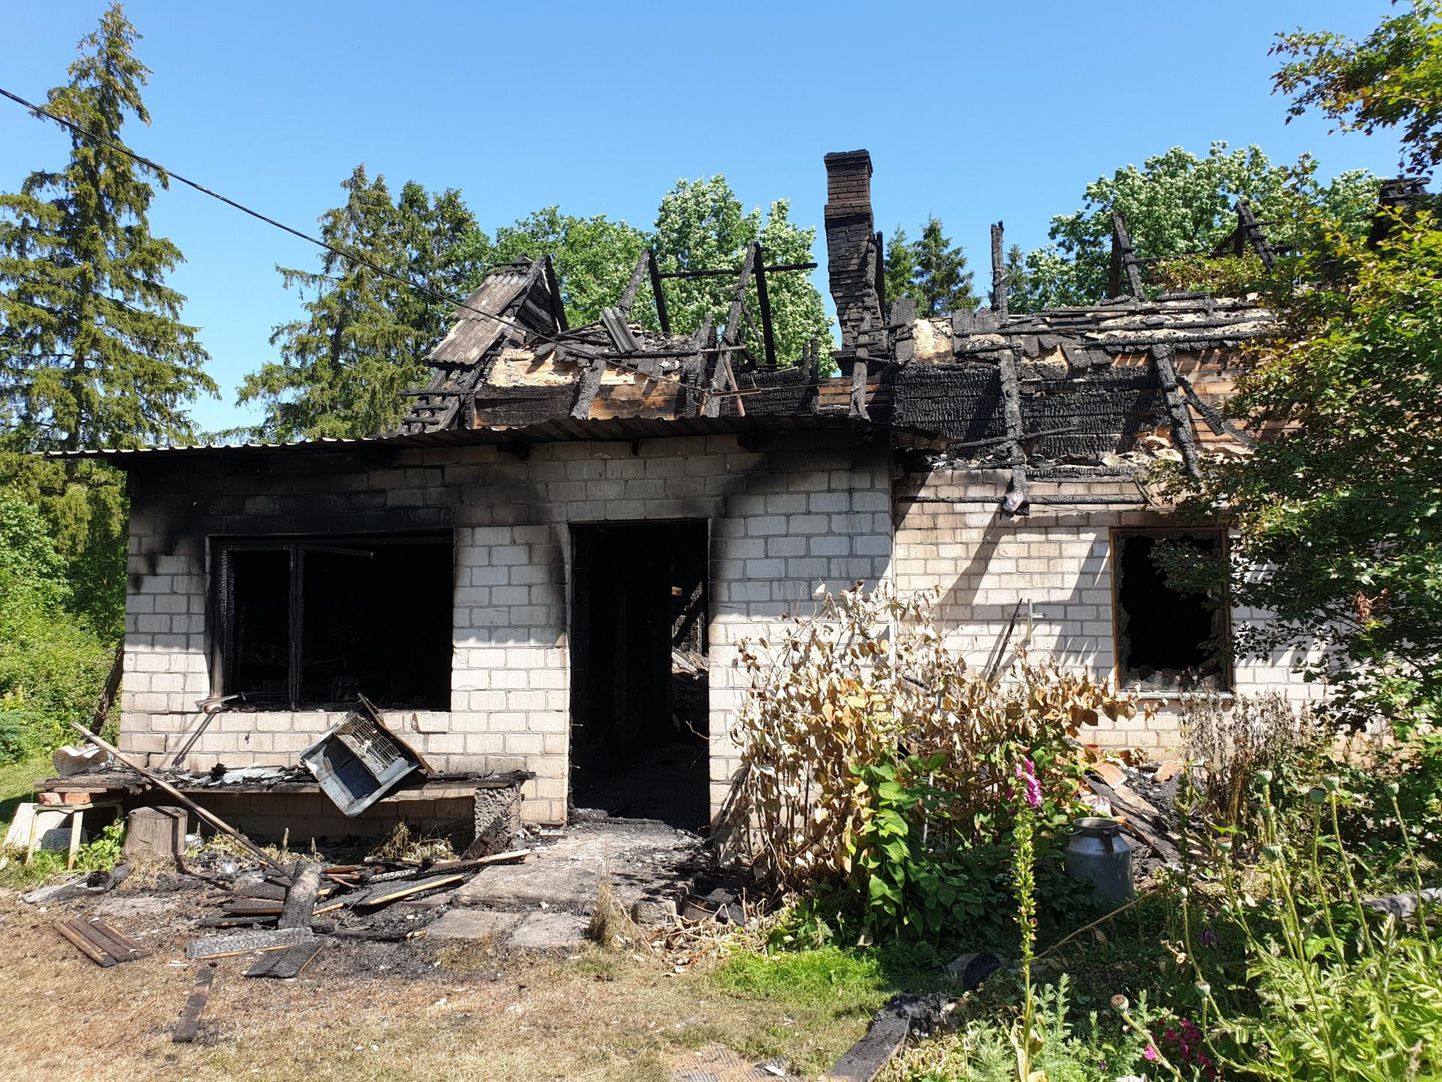 House fire that took the life of a 16-year-old-boy in Kükitaja village